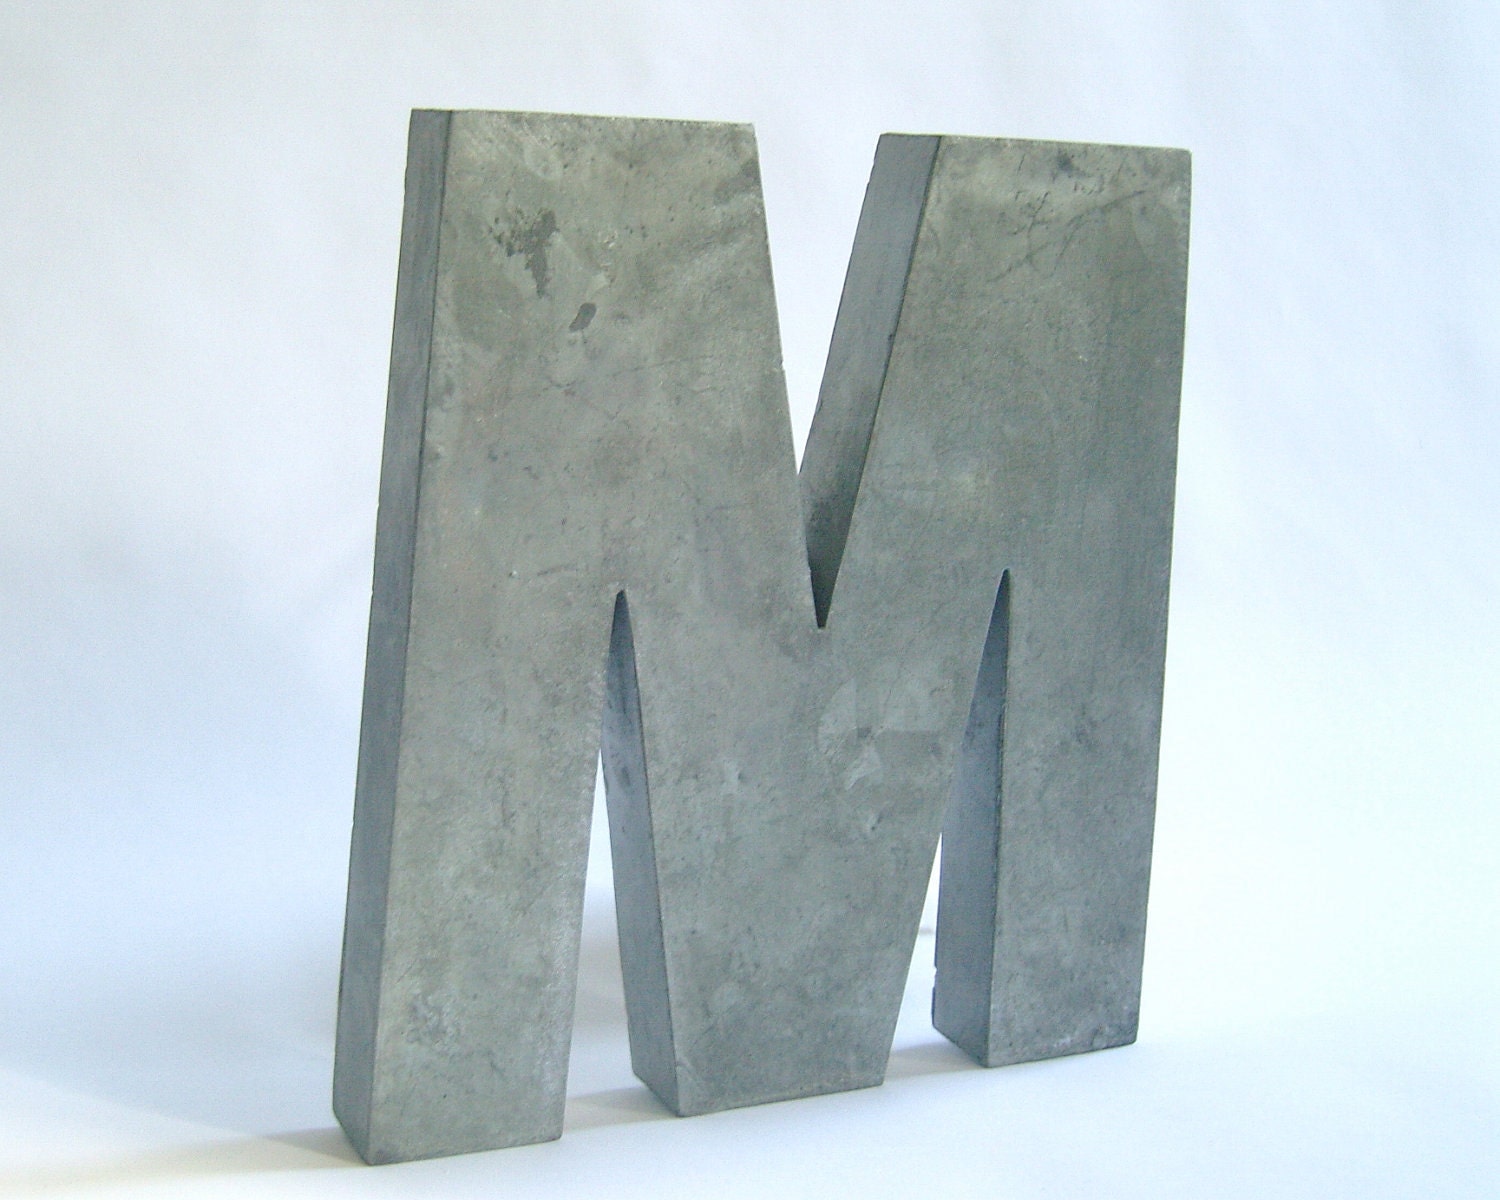 Anthropologie silver, distressed metal letter 